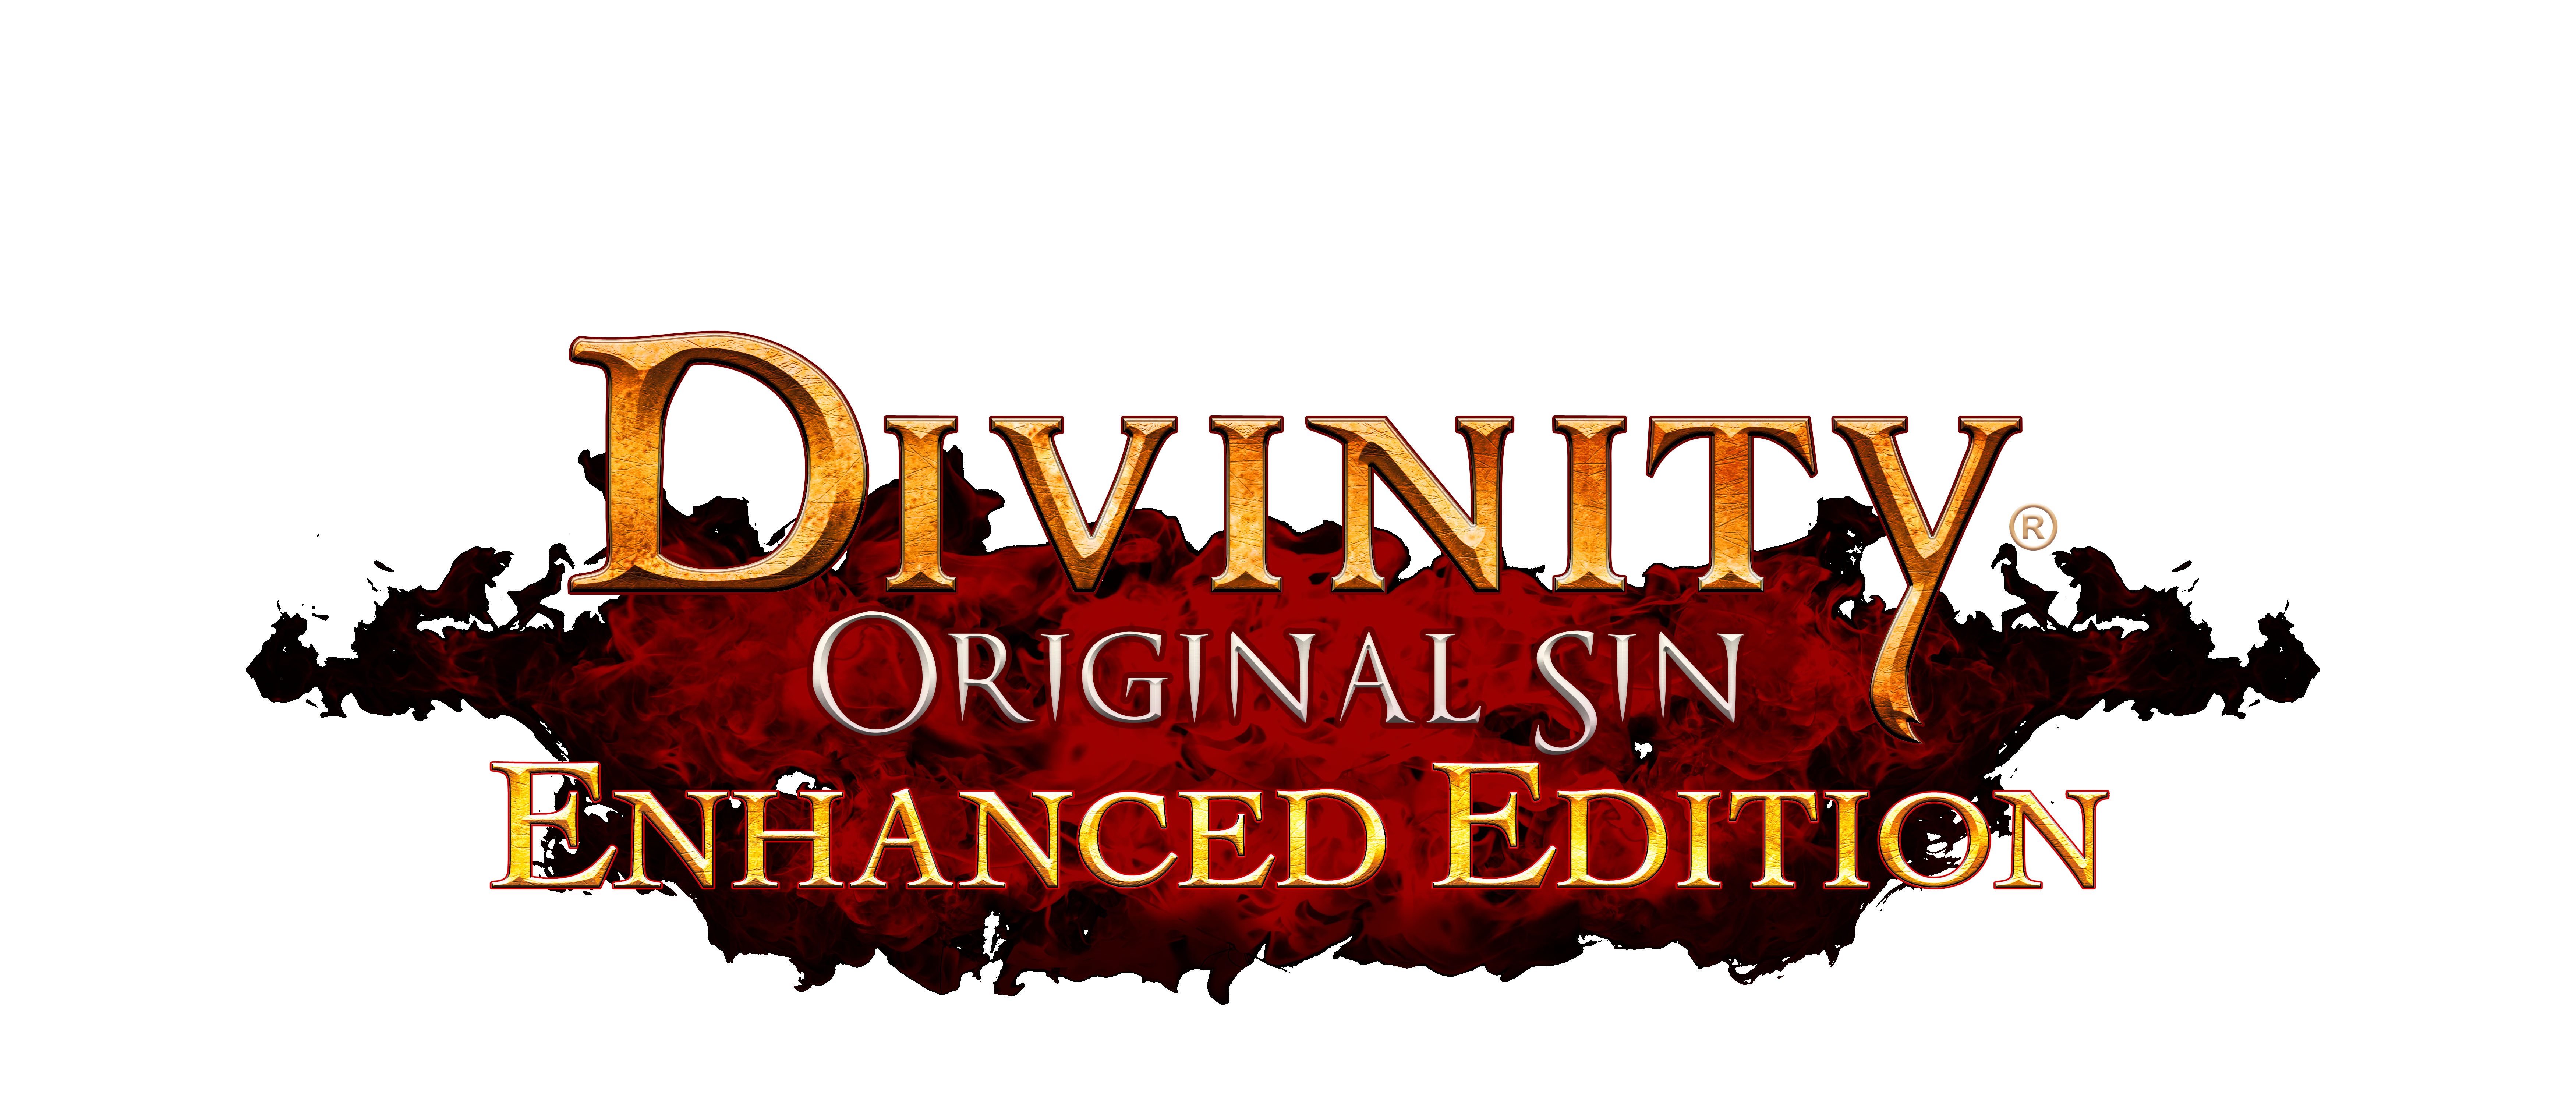 Divinity Original Sin (1) - Divinity Original Sin, Transparent background PNG HD thumbnail